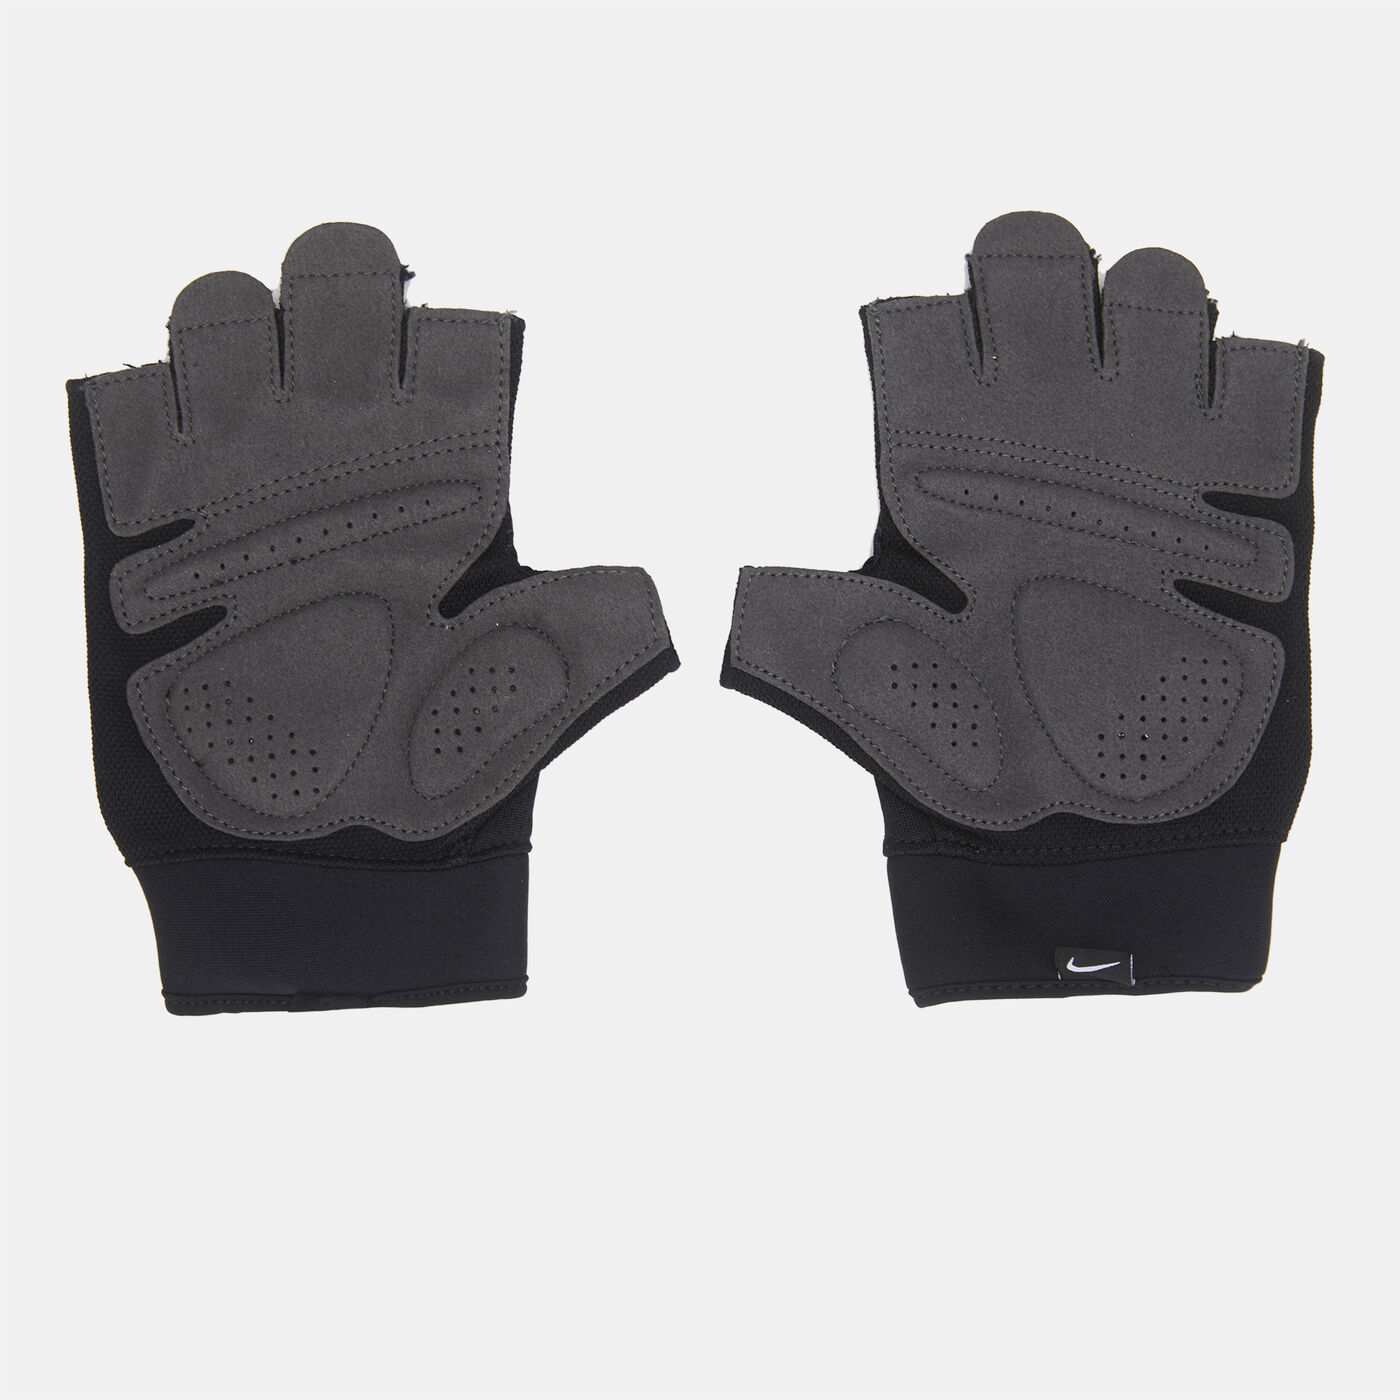 Extreme Fitness Gloves - XL